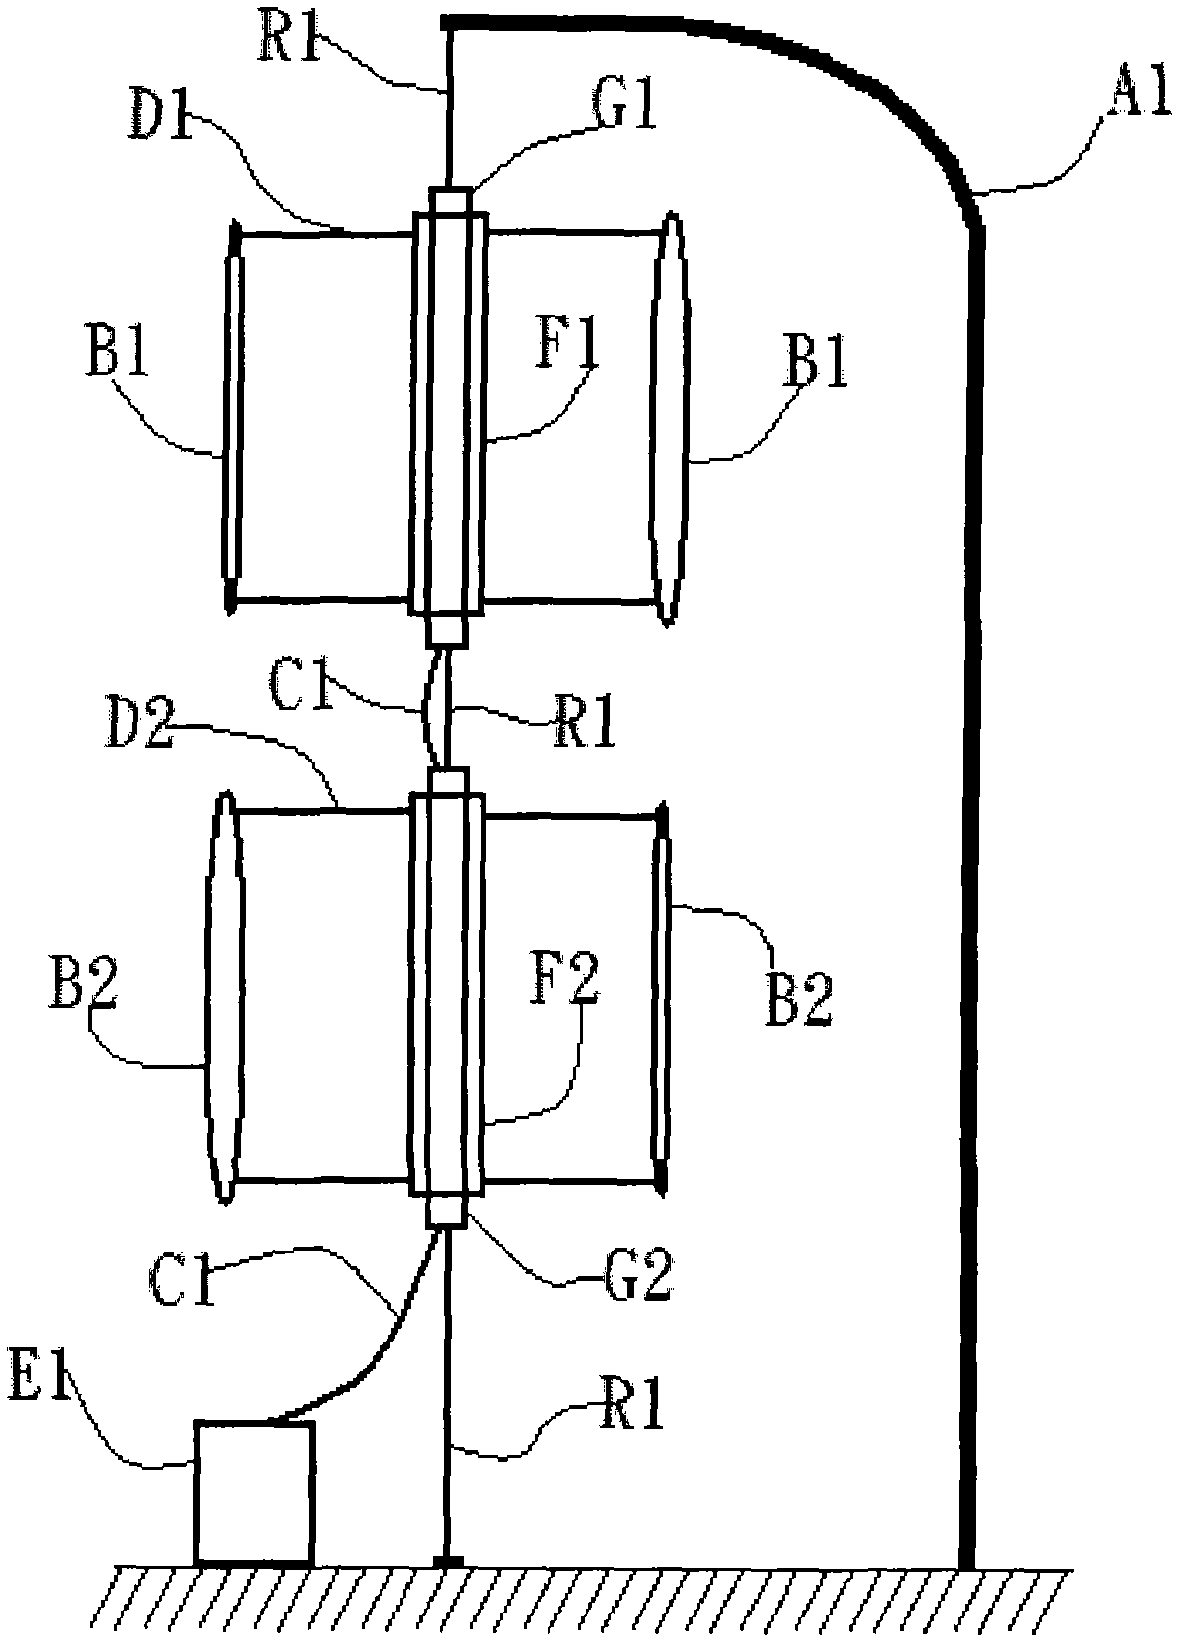 Small-sized wind power generation system